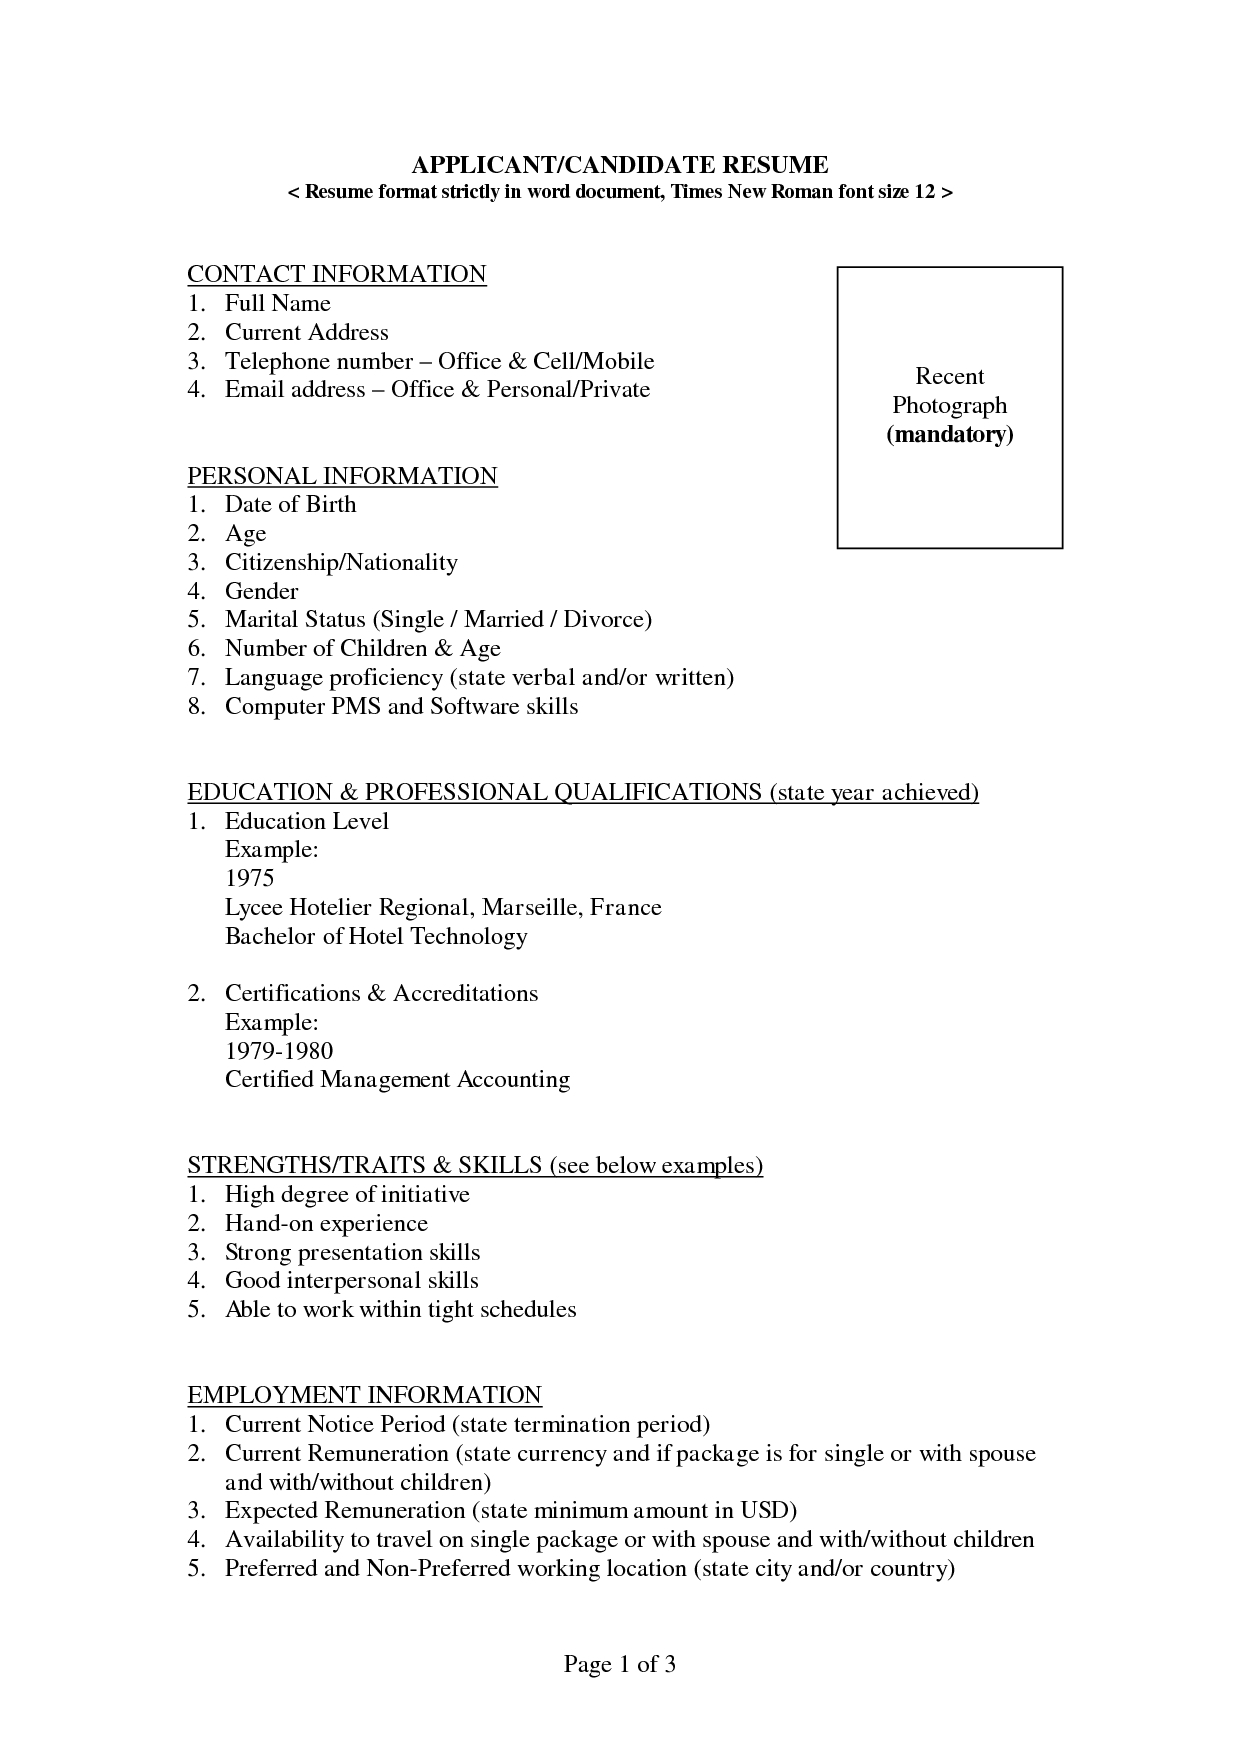 Free Blank Resume Templates For Microsoft Word | Resume Inside Blank Resume Templates For Microsoft Word